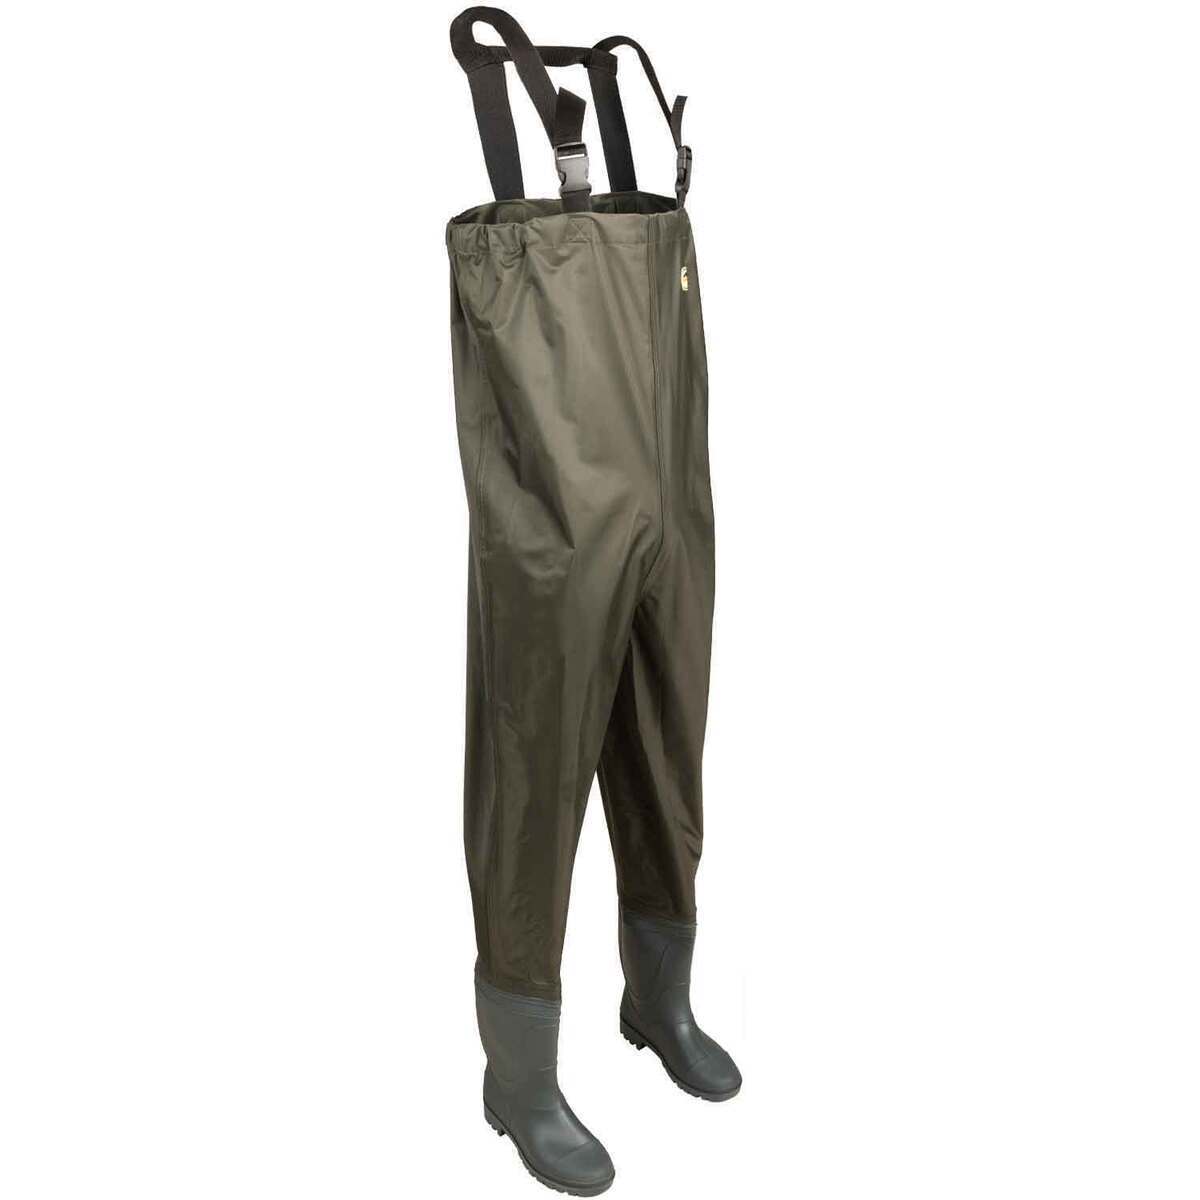 Fishing Waders for Men for sale in Anchorage, Alaska